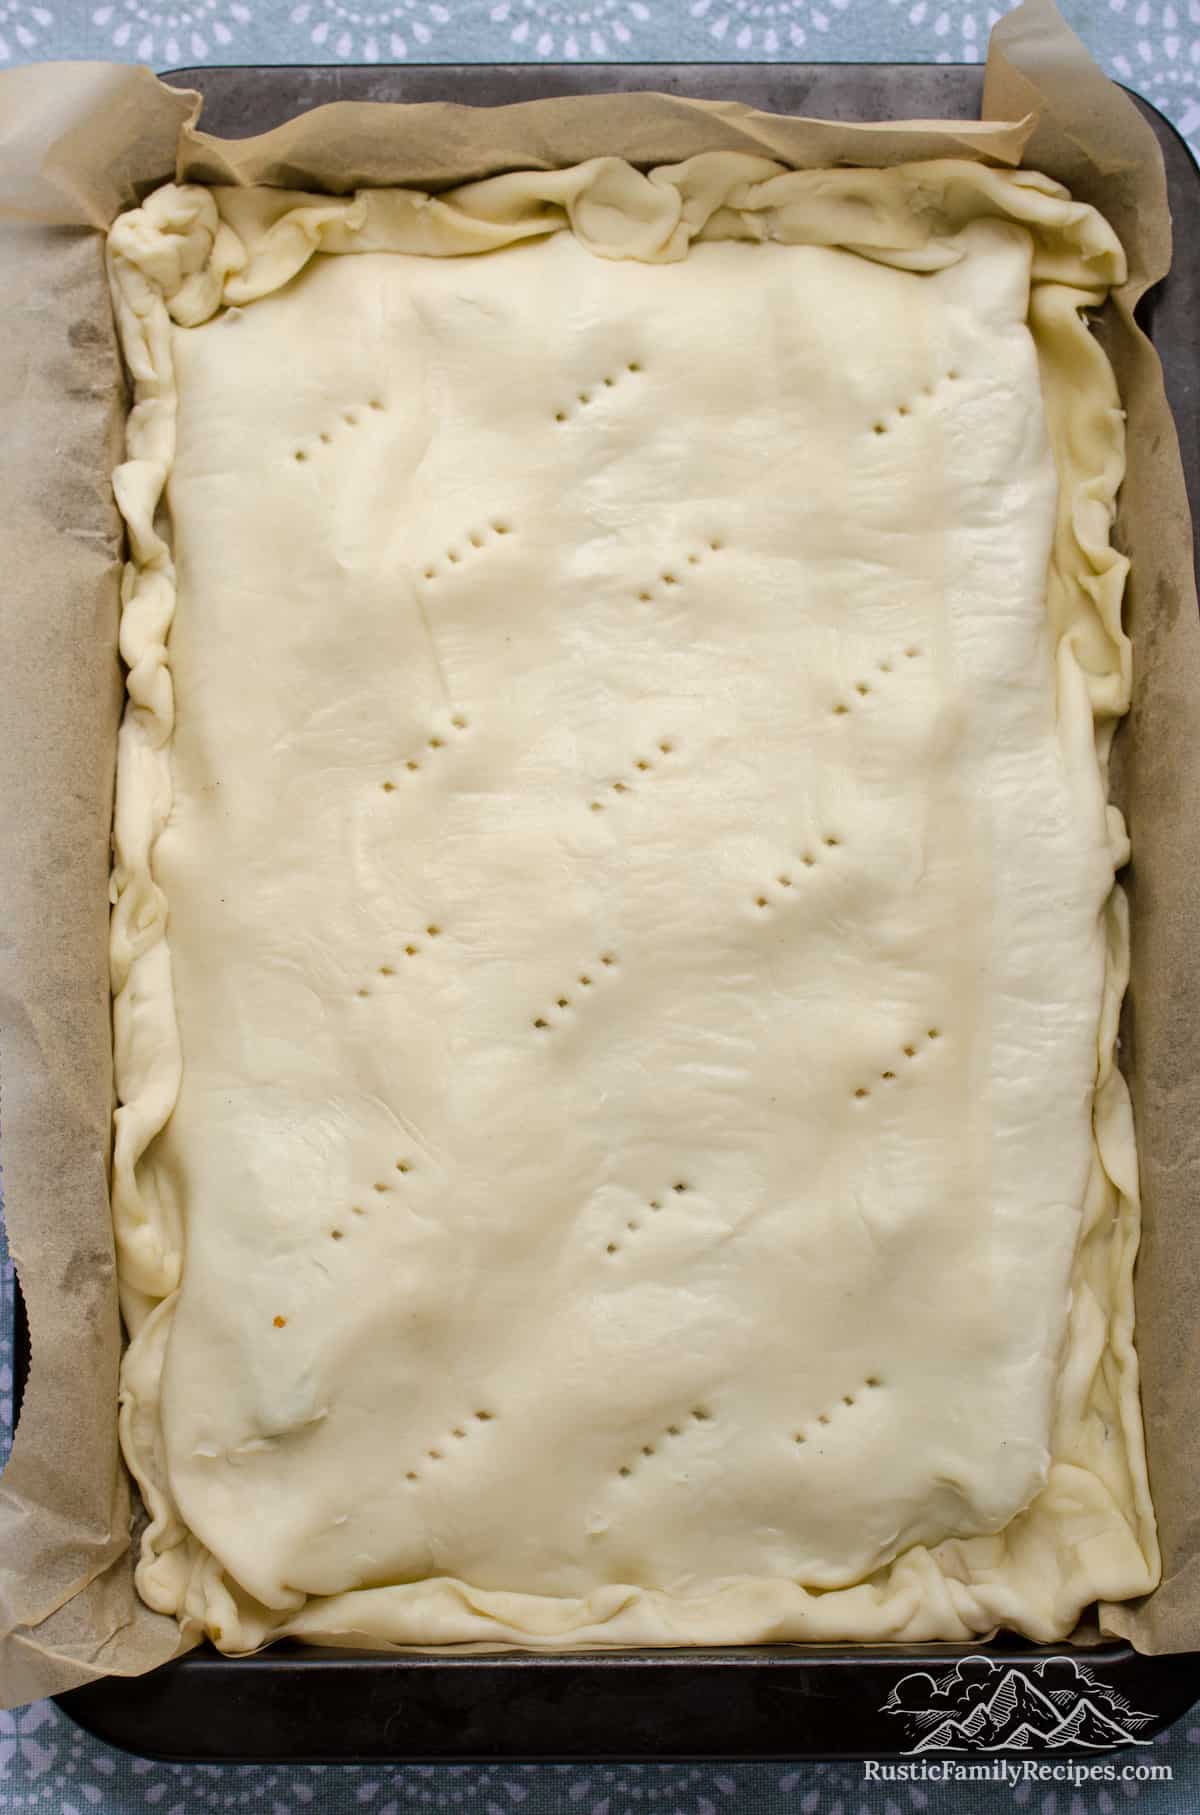 The topping ingredients for zucchini tart in a large rectangular parchment-lined baking pan, topped with pastry dough with fork pricks in the surface.